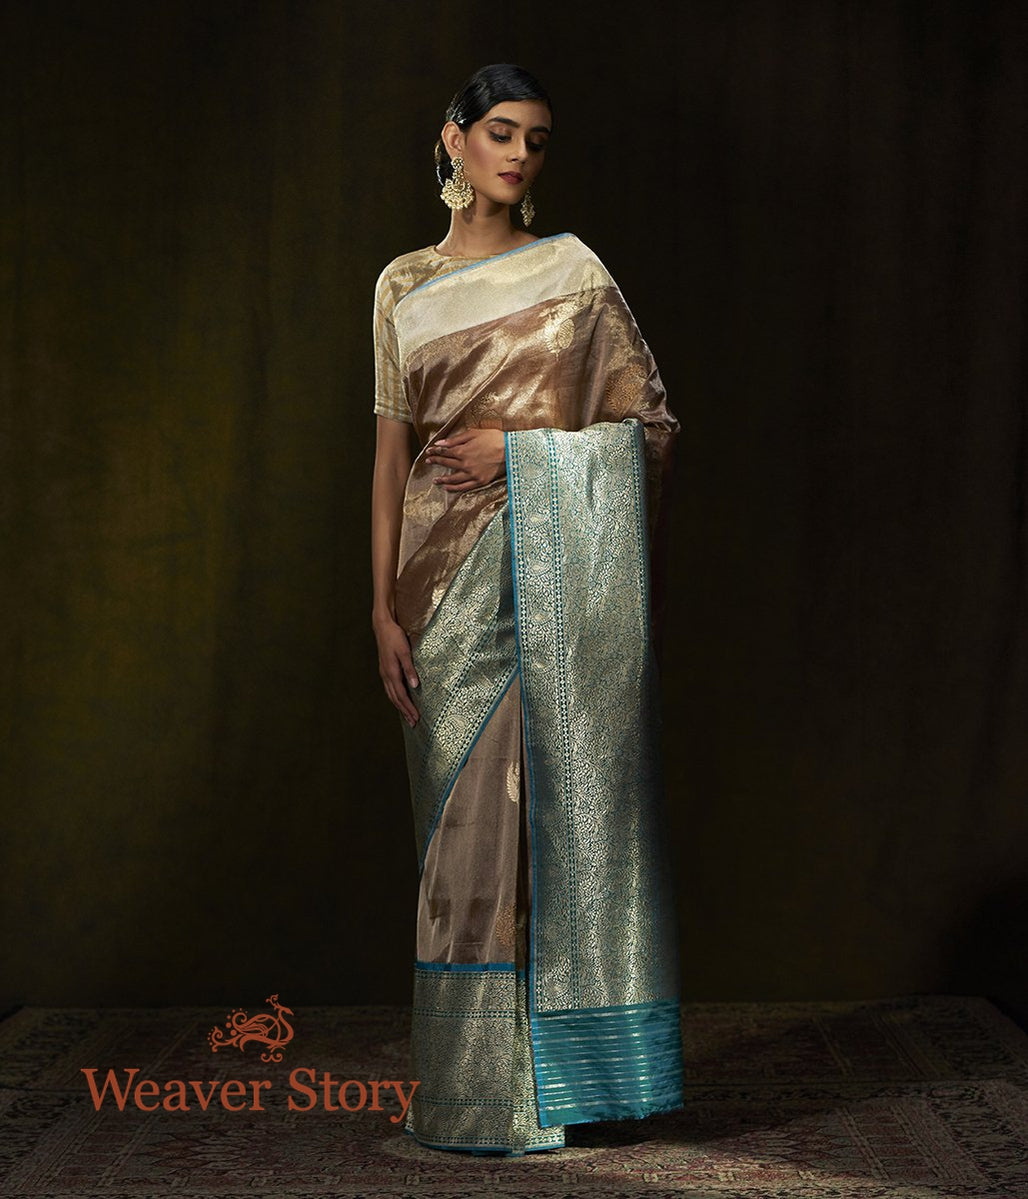 Handwoven_Copper_and_Brown_Tone_Silk_Tissue_Saree_WeaverStory_02